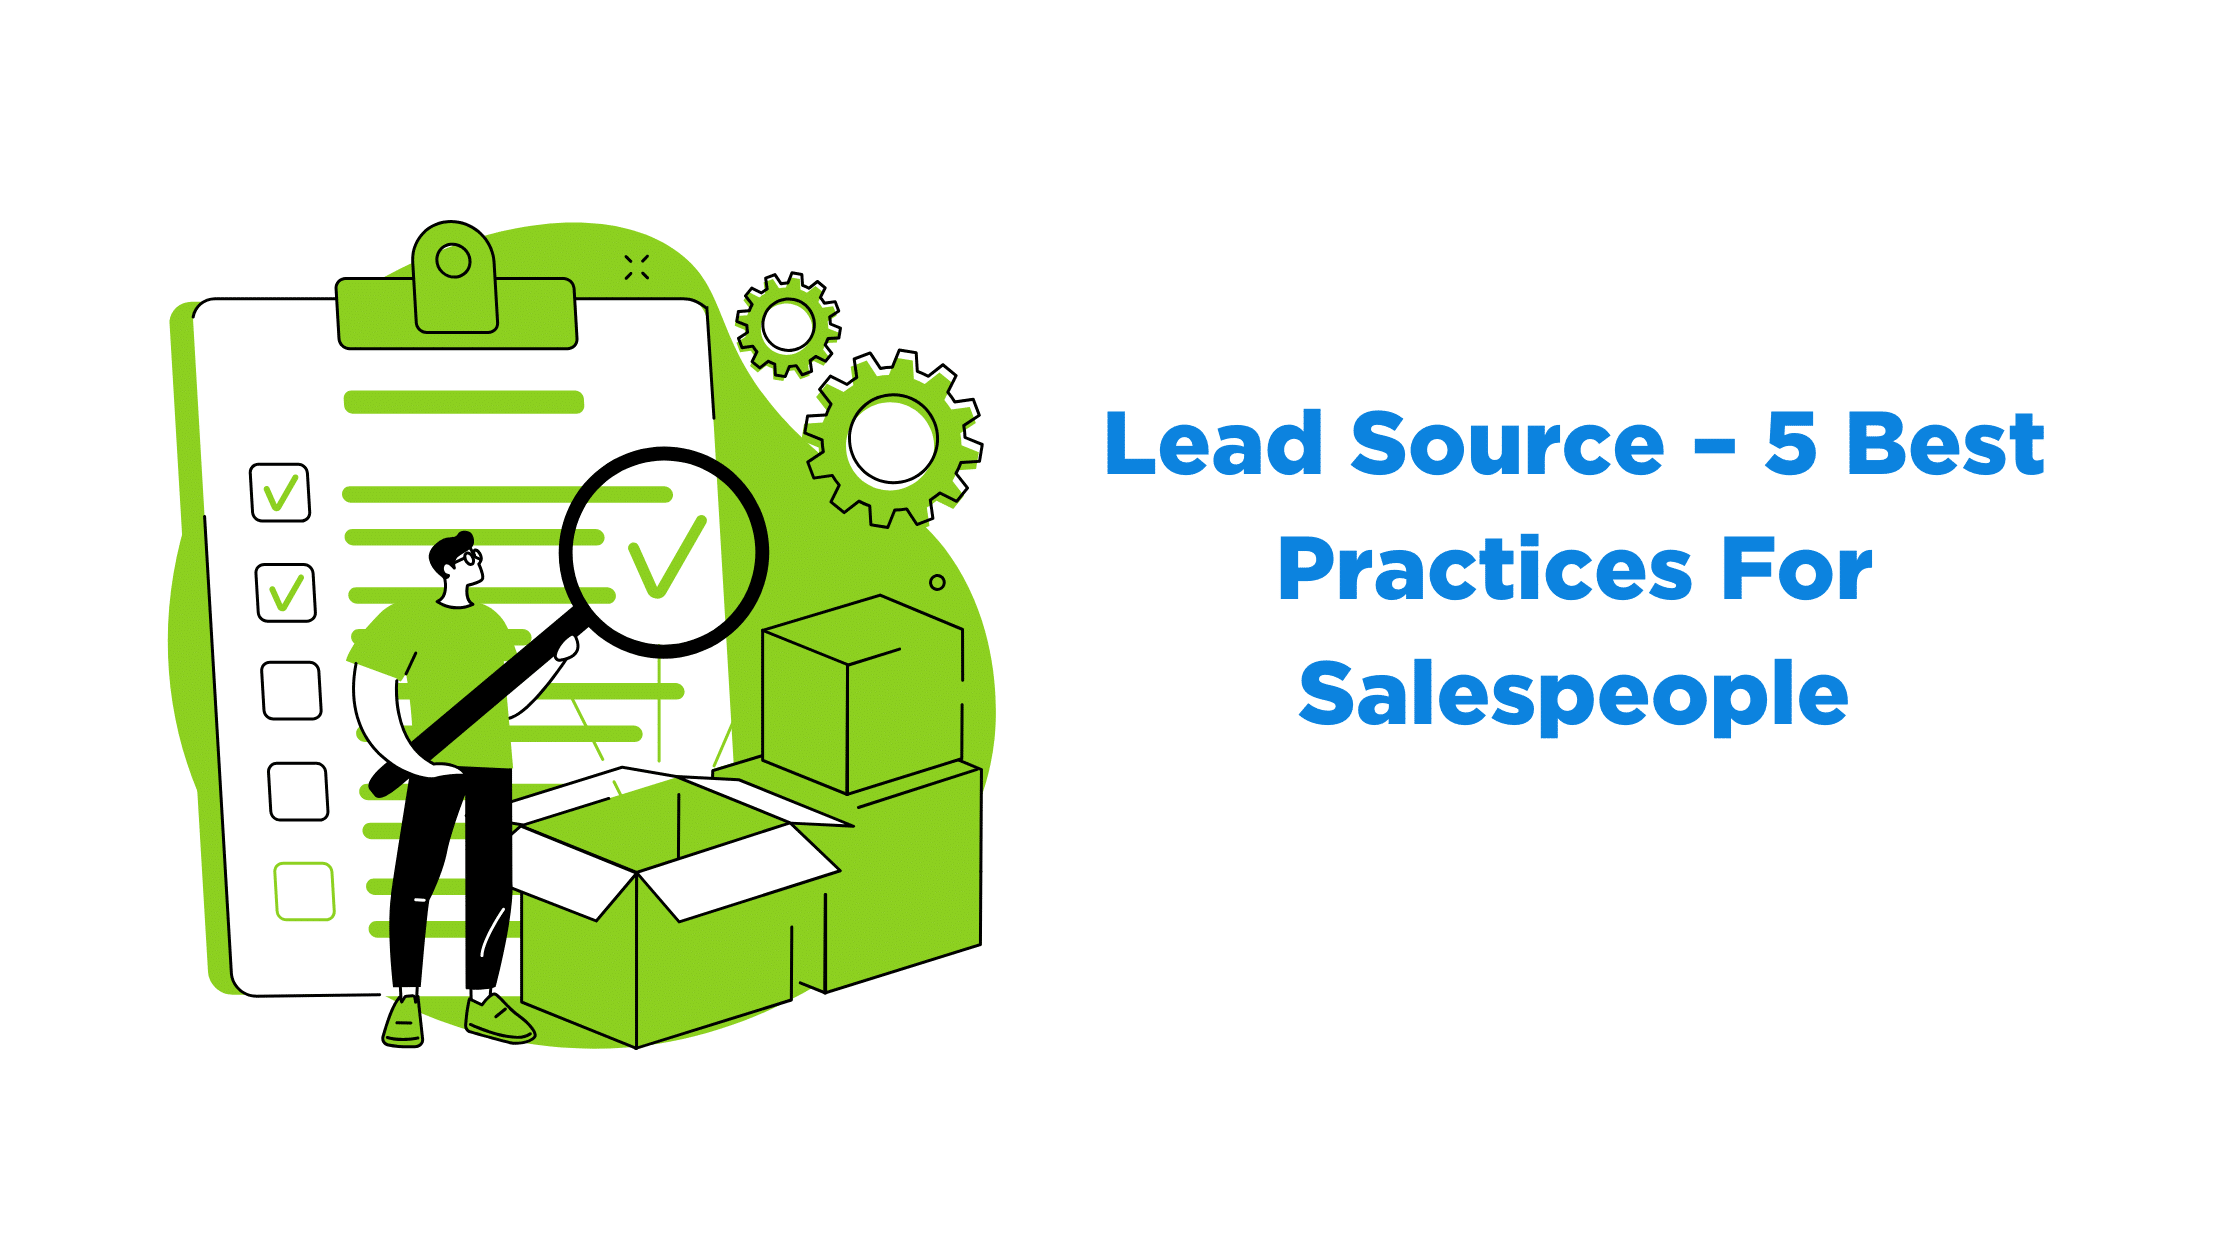 Lead Source – 5 Best Practices For Salespeople